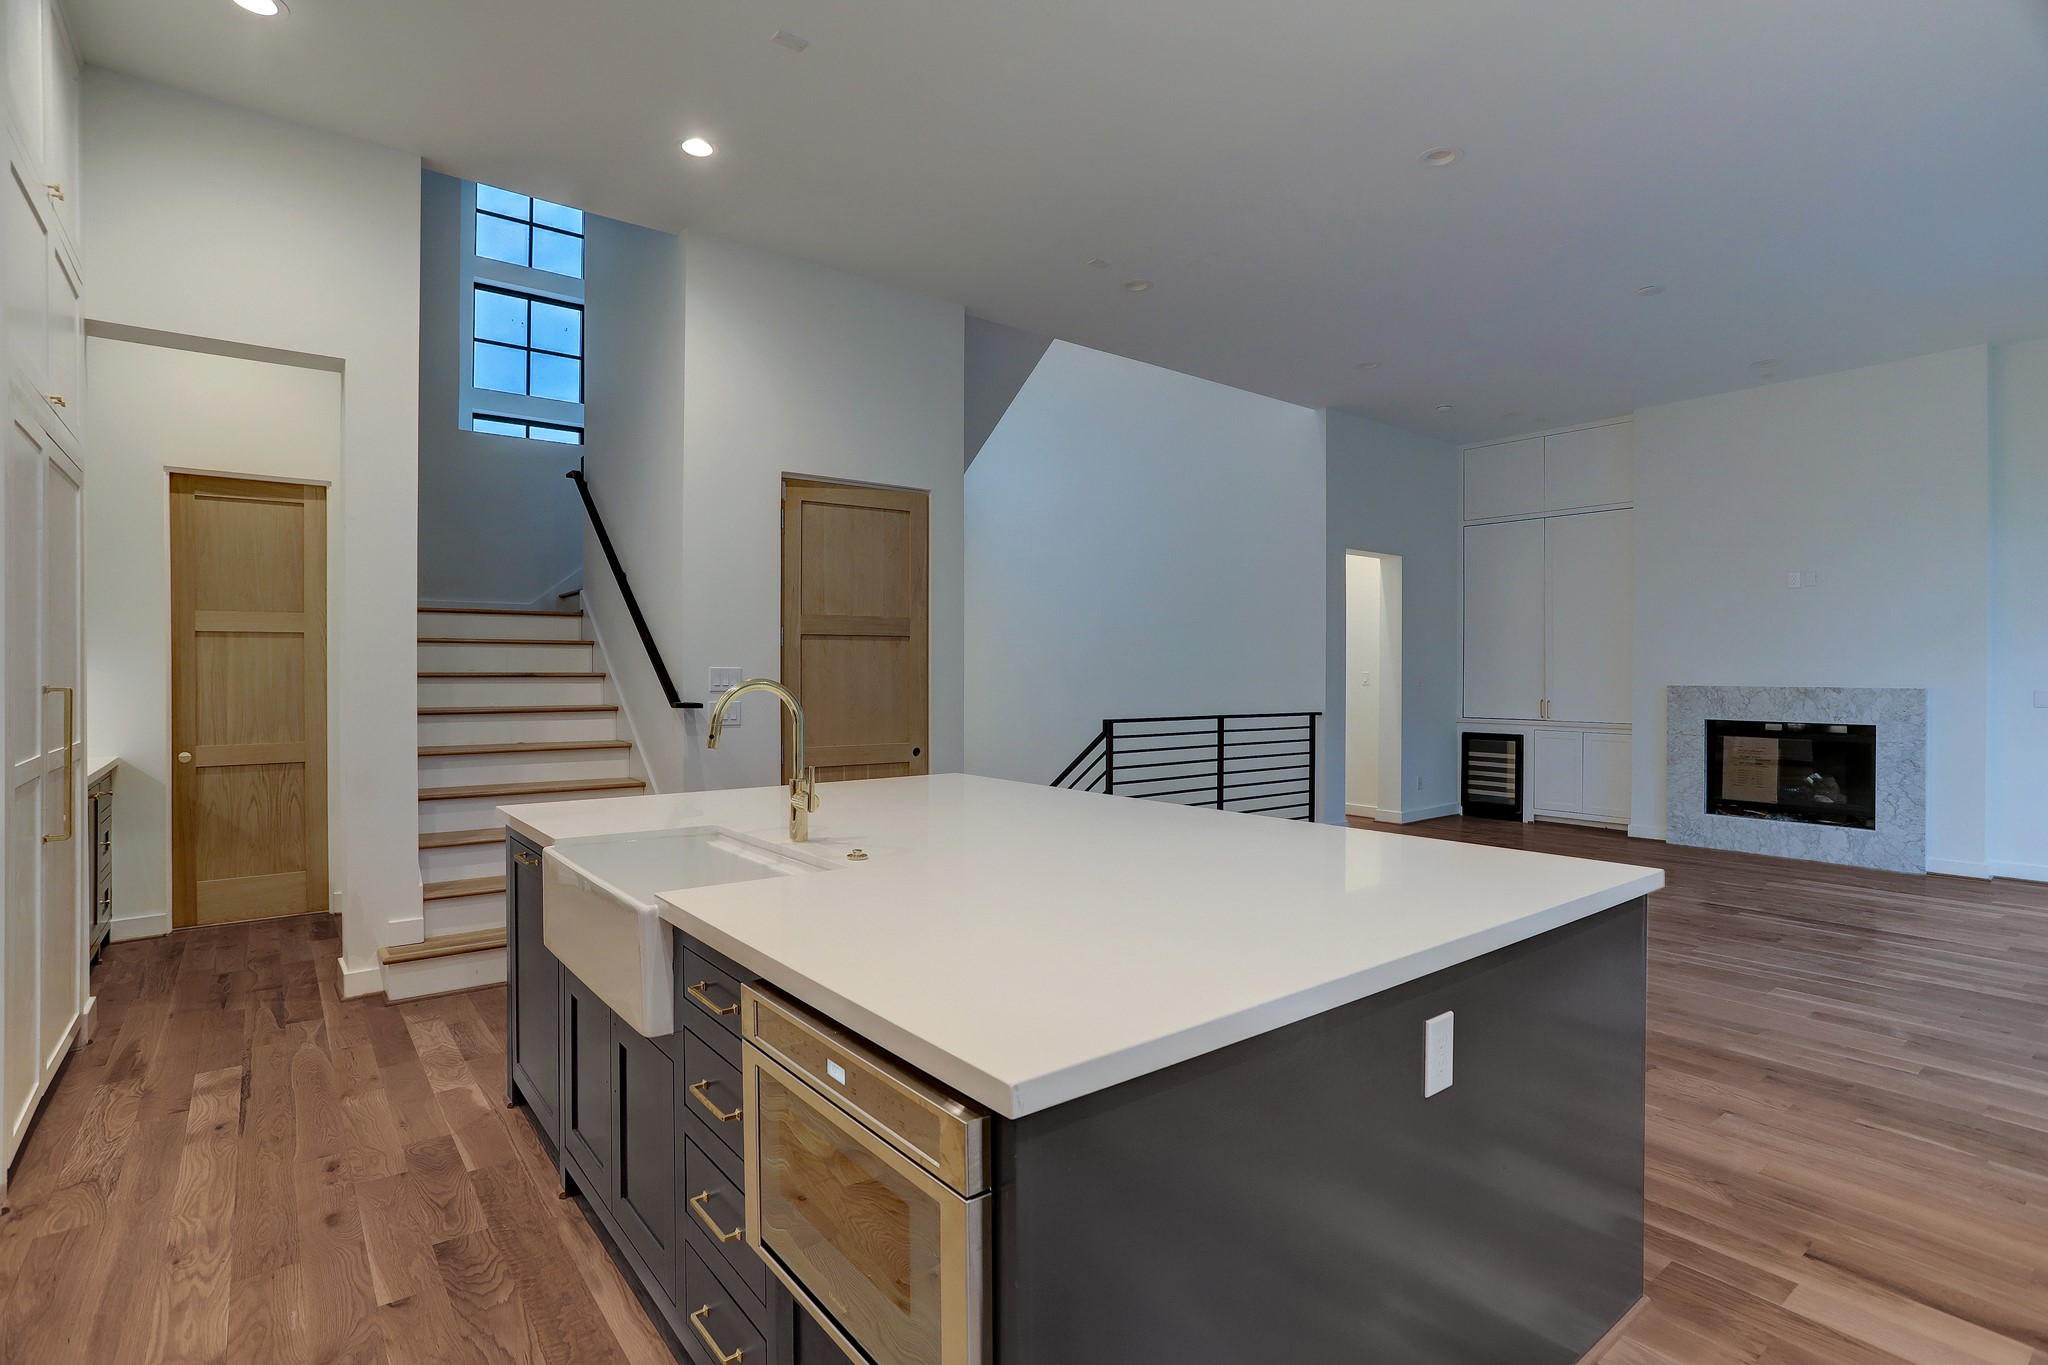 You never have to leave the second floor! Large kitchen, living room, dining room, study, primary suite and large walkout terrace.* Behind the second oak door on the right is the elevator.